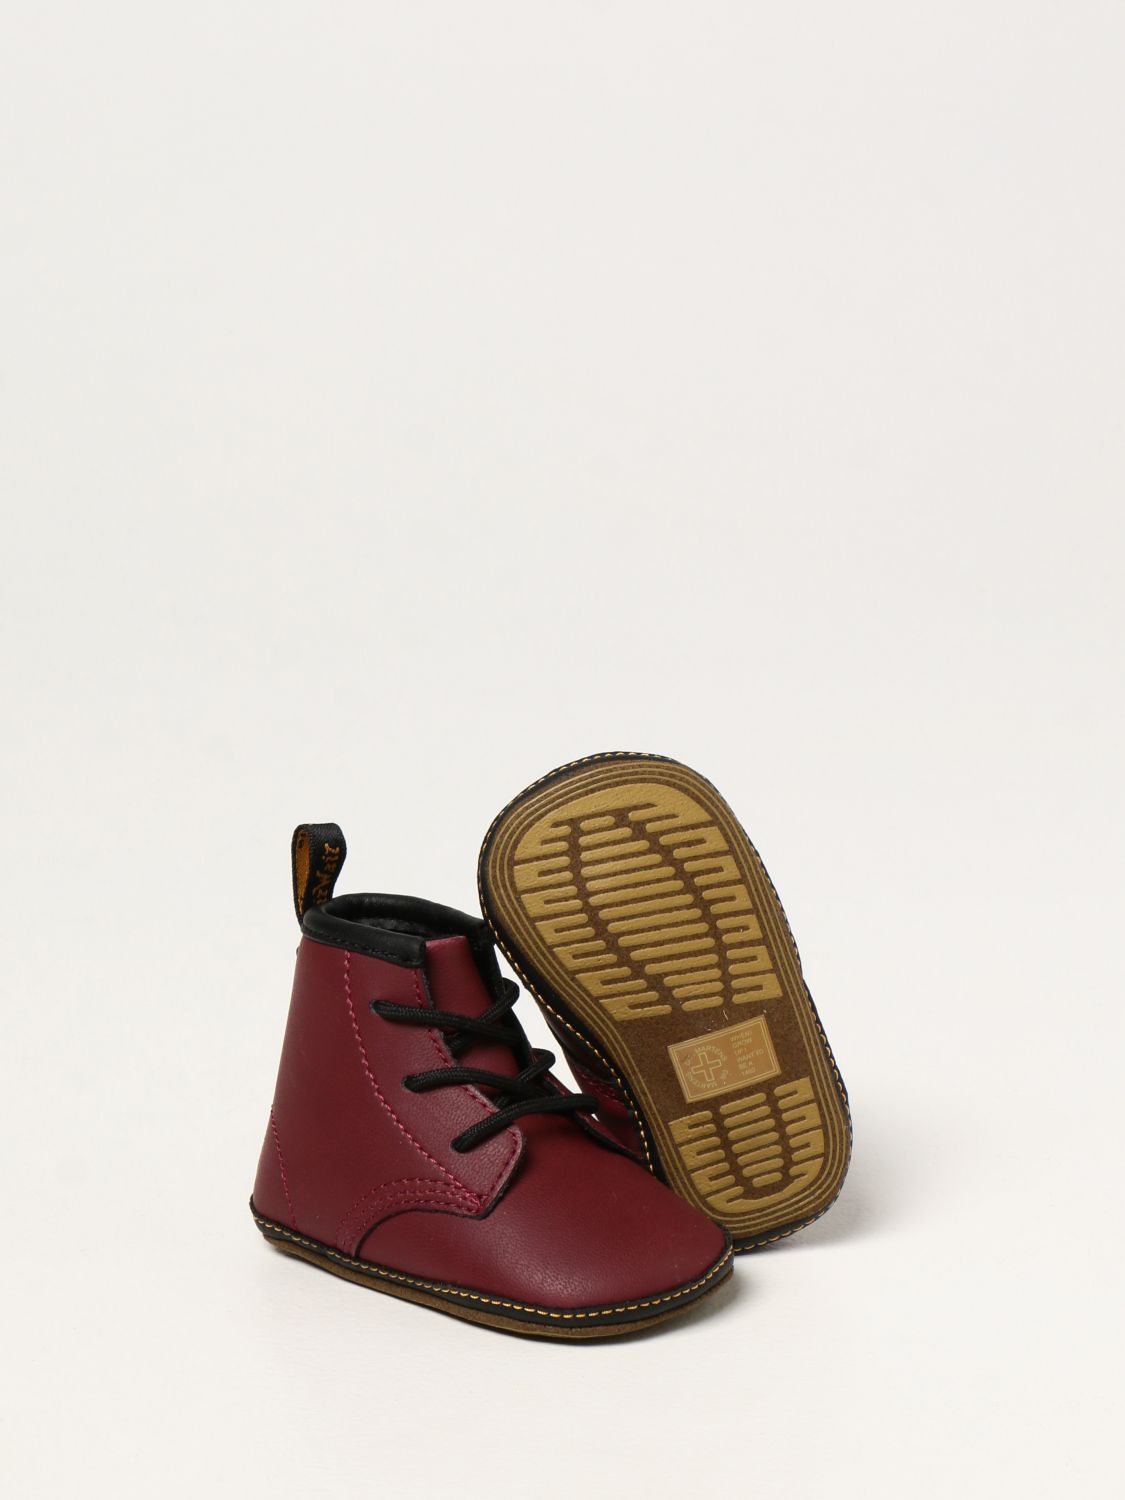 Shoes Dr. Martens: Dr. Martens 1460 shoe in rubberized leather burgundy 2